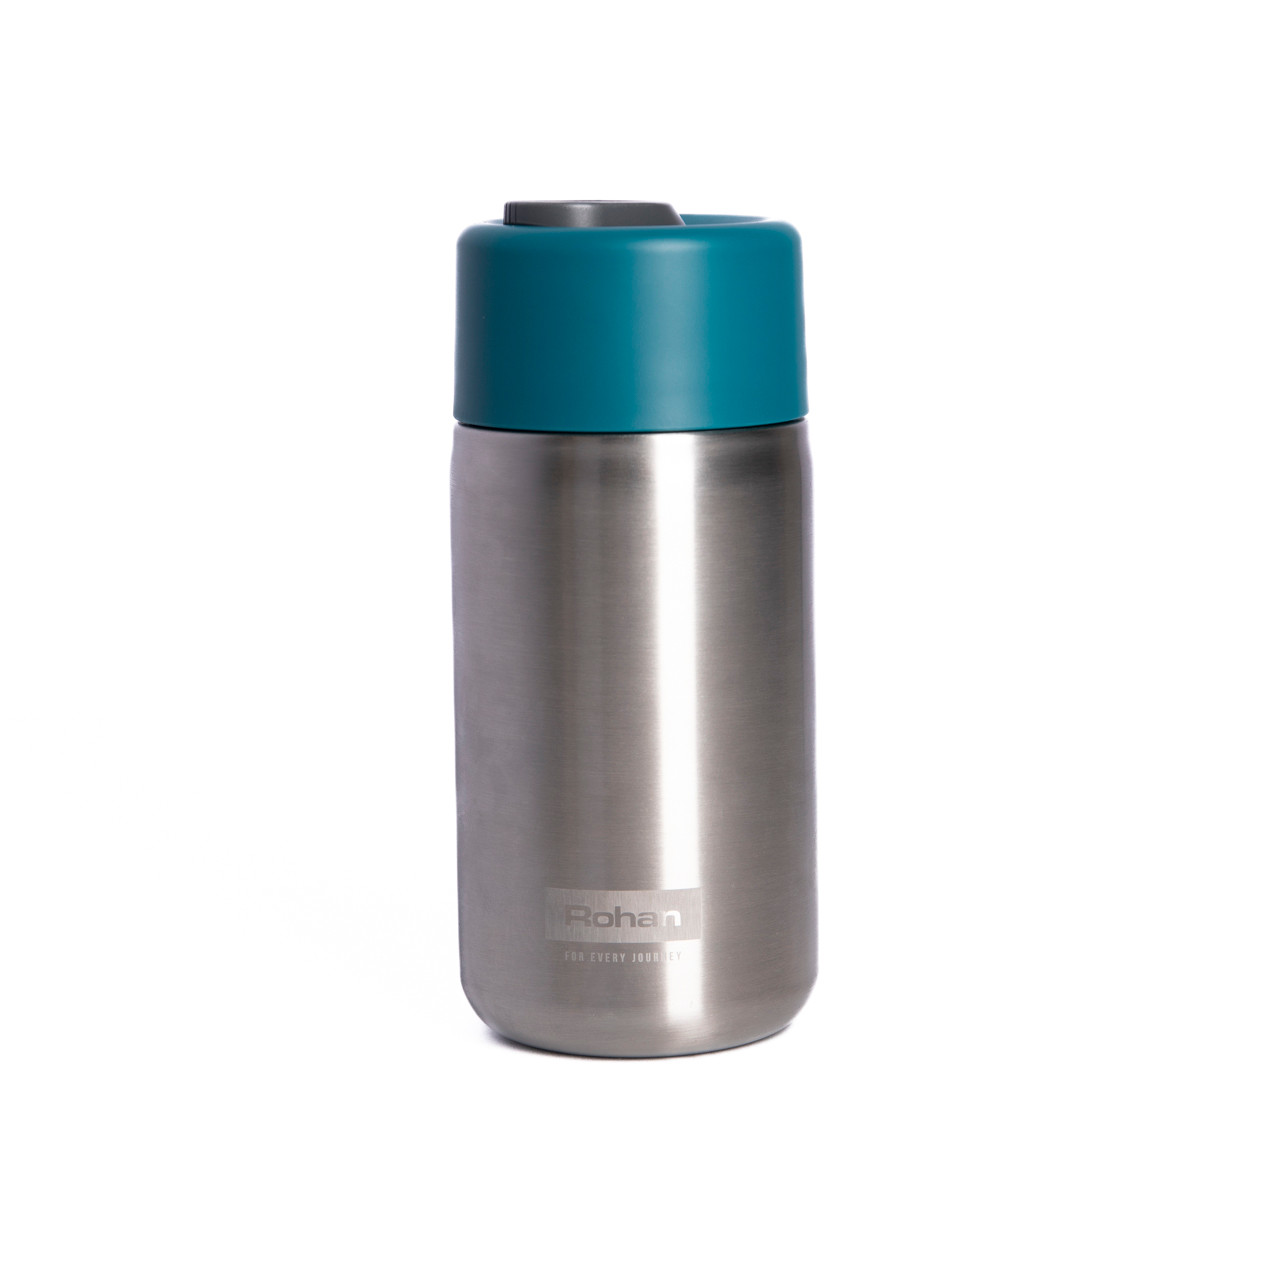 Black+Blum, Insulated Stainless Steel Travel Cup